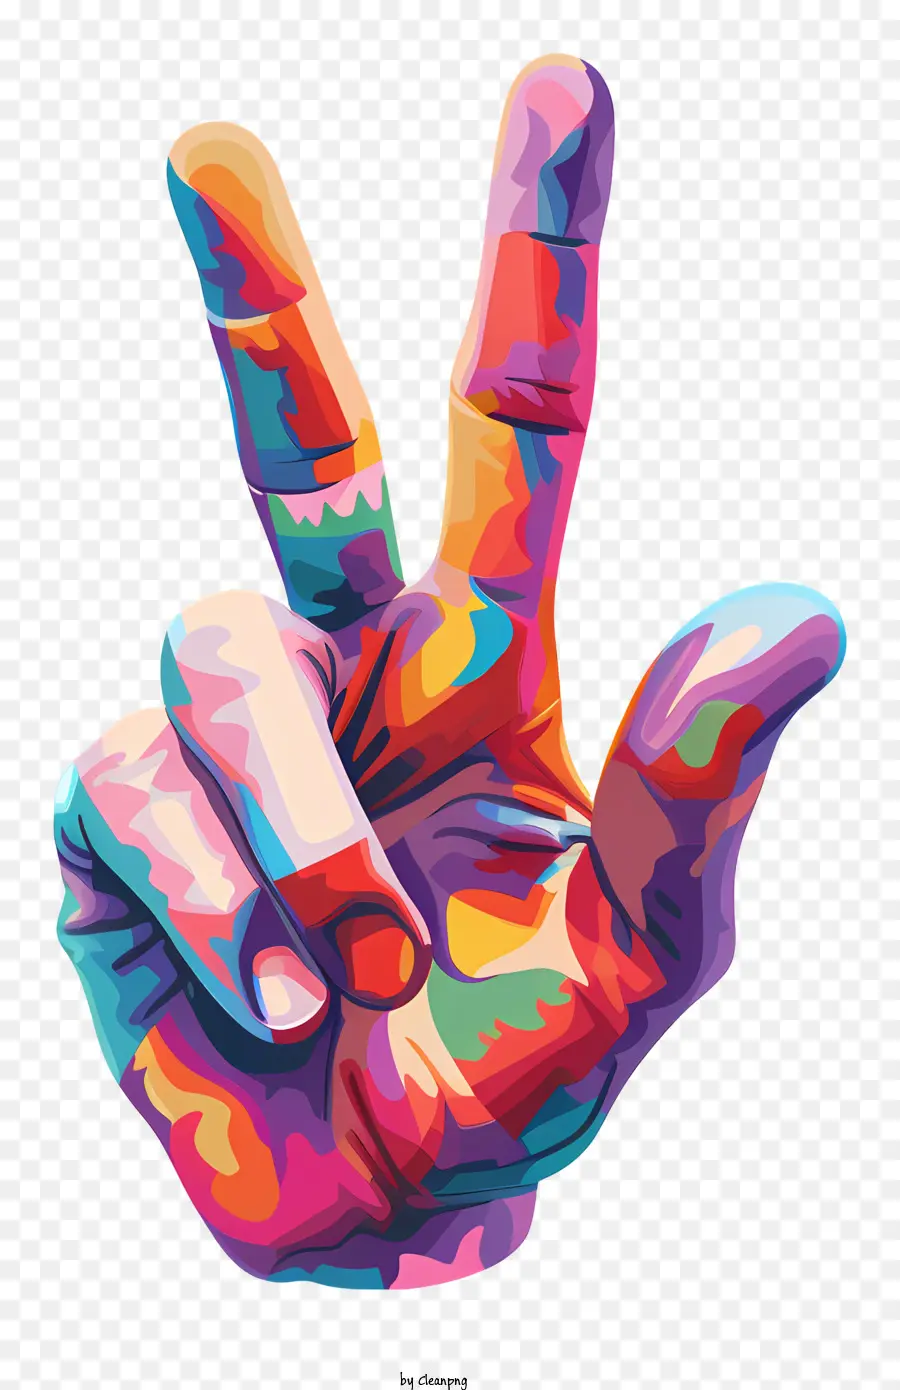 hand peace sign rainbow colors hand gesture symbol